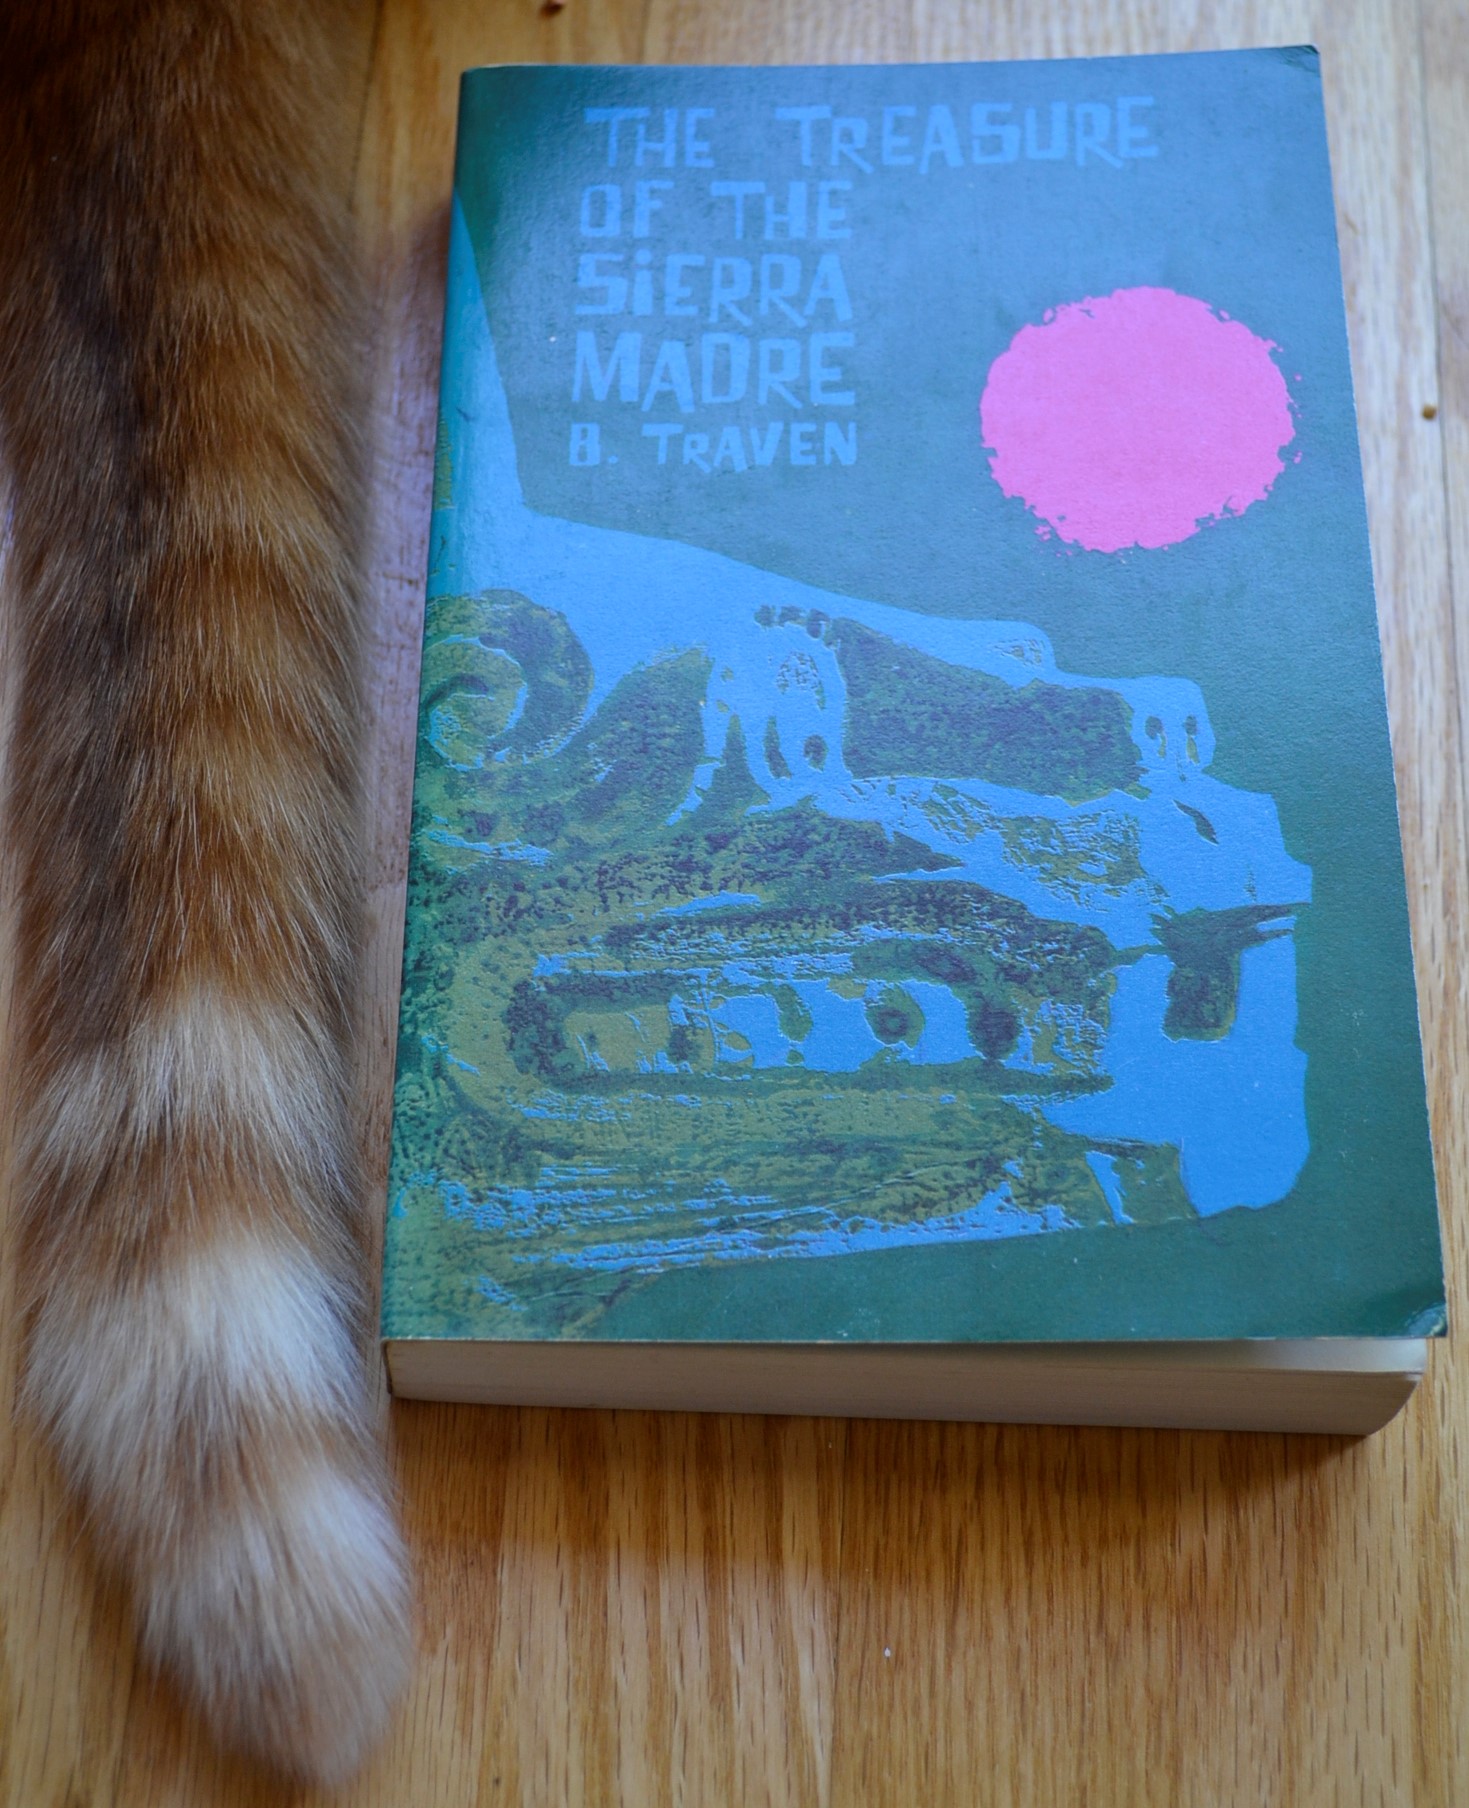 An orange tabby tail with white rings at the tip sits beside a book.